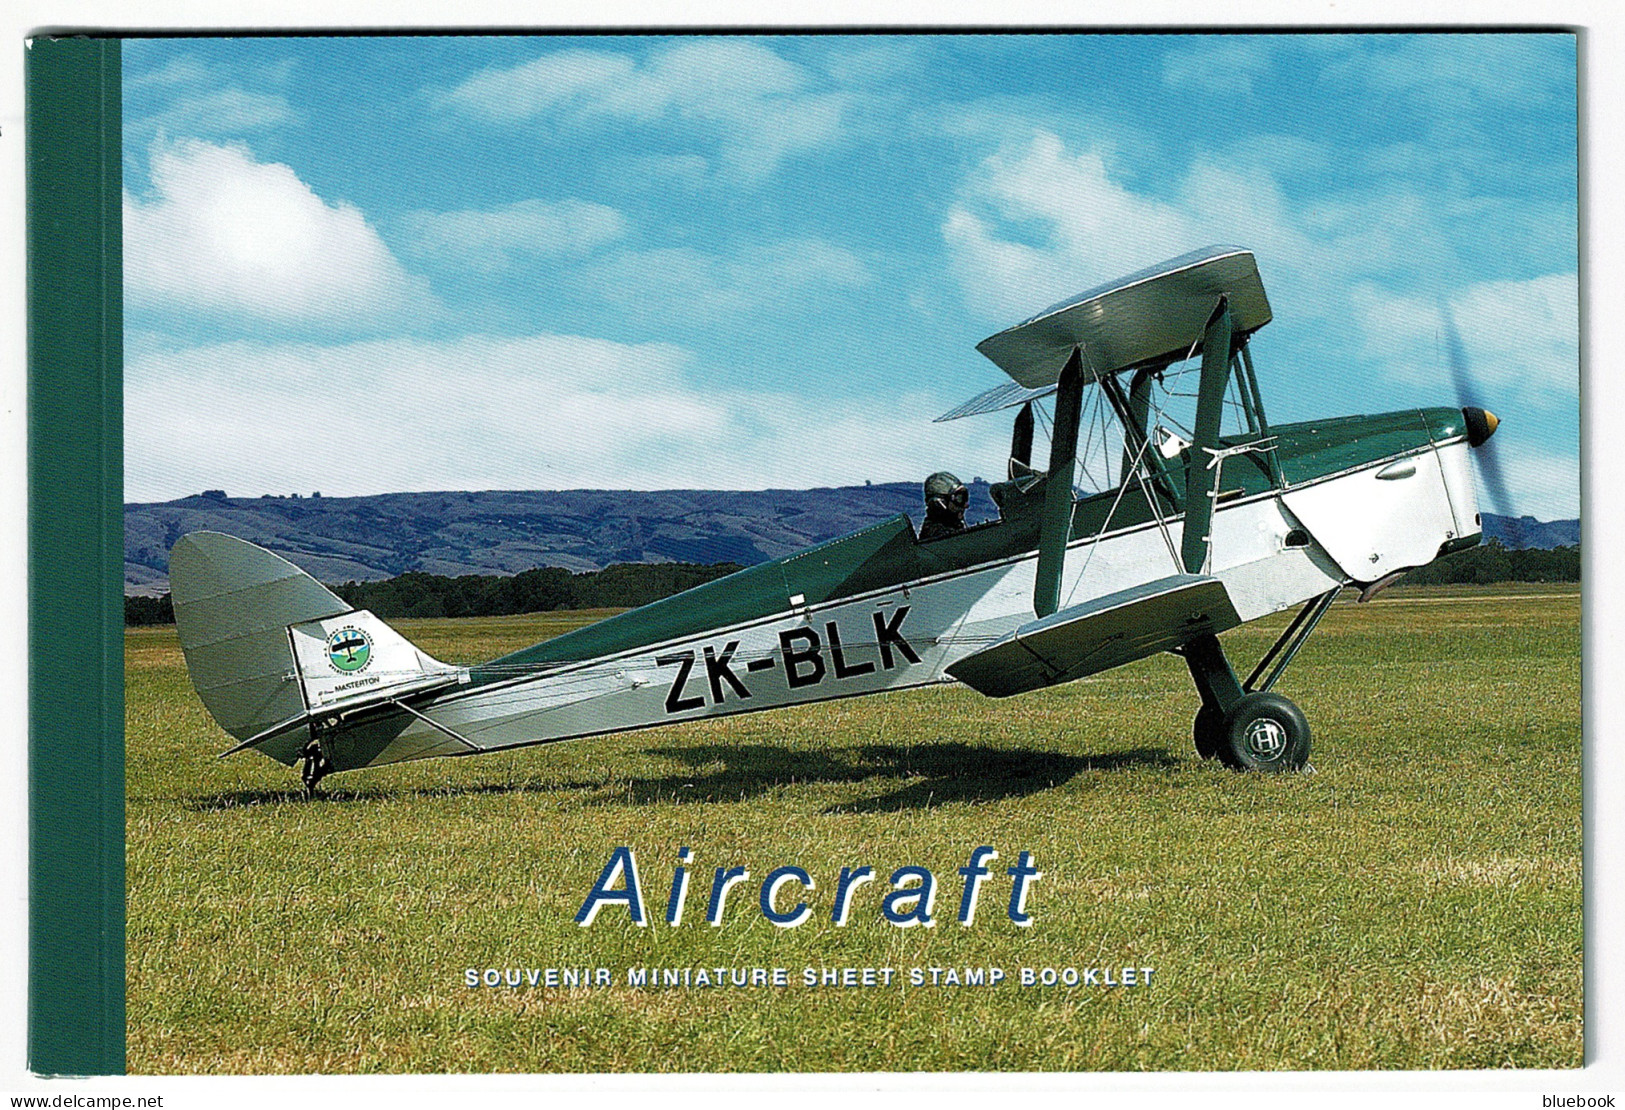 Ref 1602 - New Zealand Aviation Stamp Booklet - Aircraft With 7 Miniature Sheets - Booklets